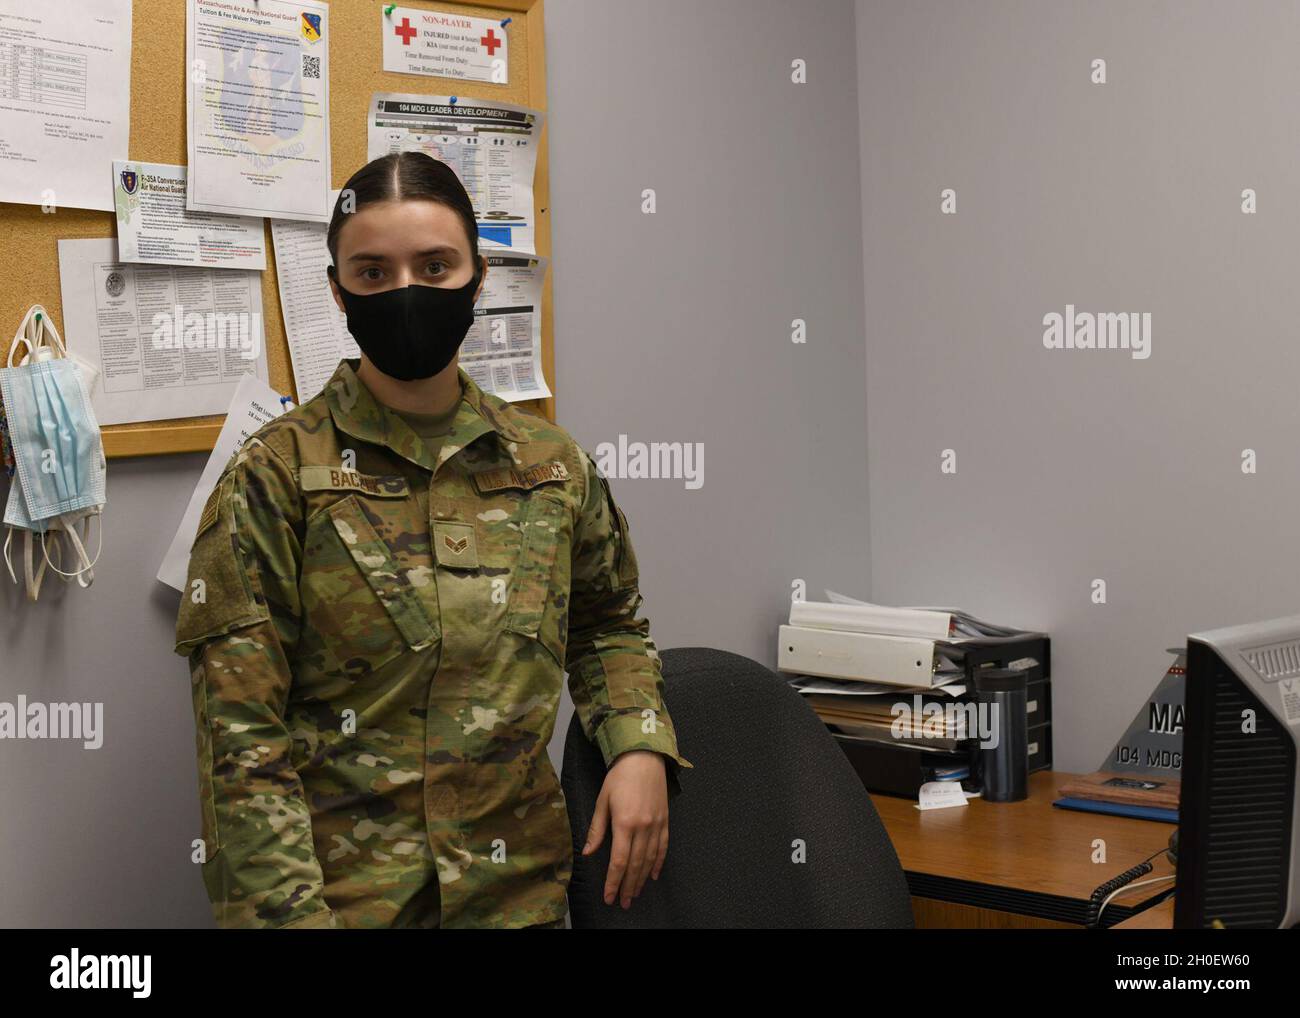 Senior Airman Weronika Baczek, public health technician, 104th Medical Group, poses for a photo, in her office at Barnes Air National Guard Base, Massachusetts, Feb. 17, 2021. Contact tracing is critical for safeguarding 104th Fighter Wing mission readiness and the health of our Barnestormers and surrounding communities from COVID-19. Stock Photo